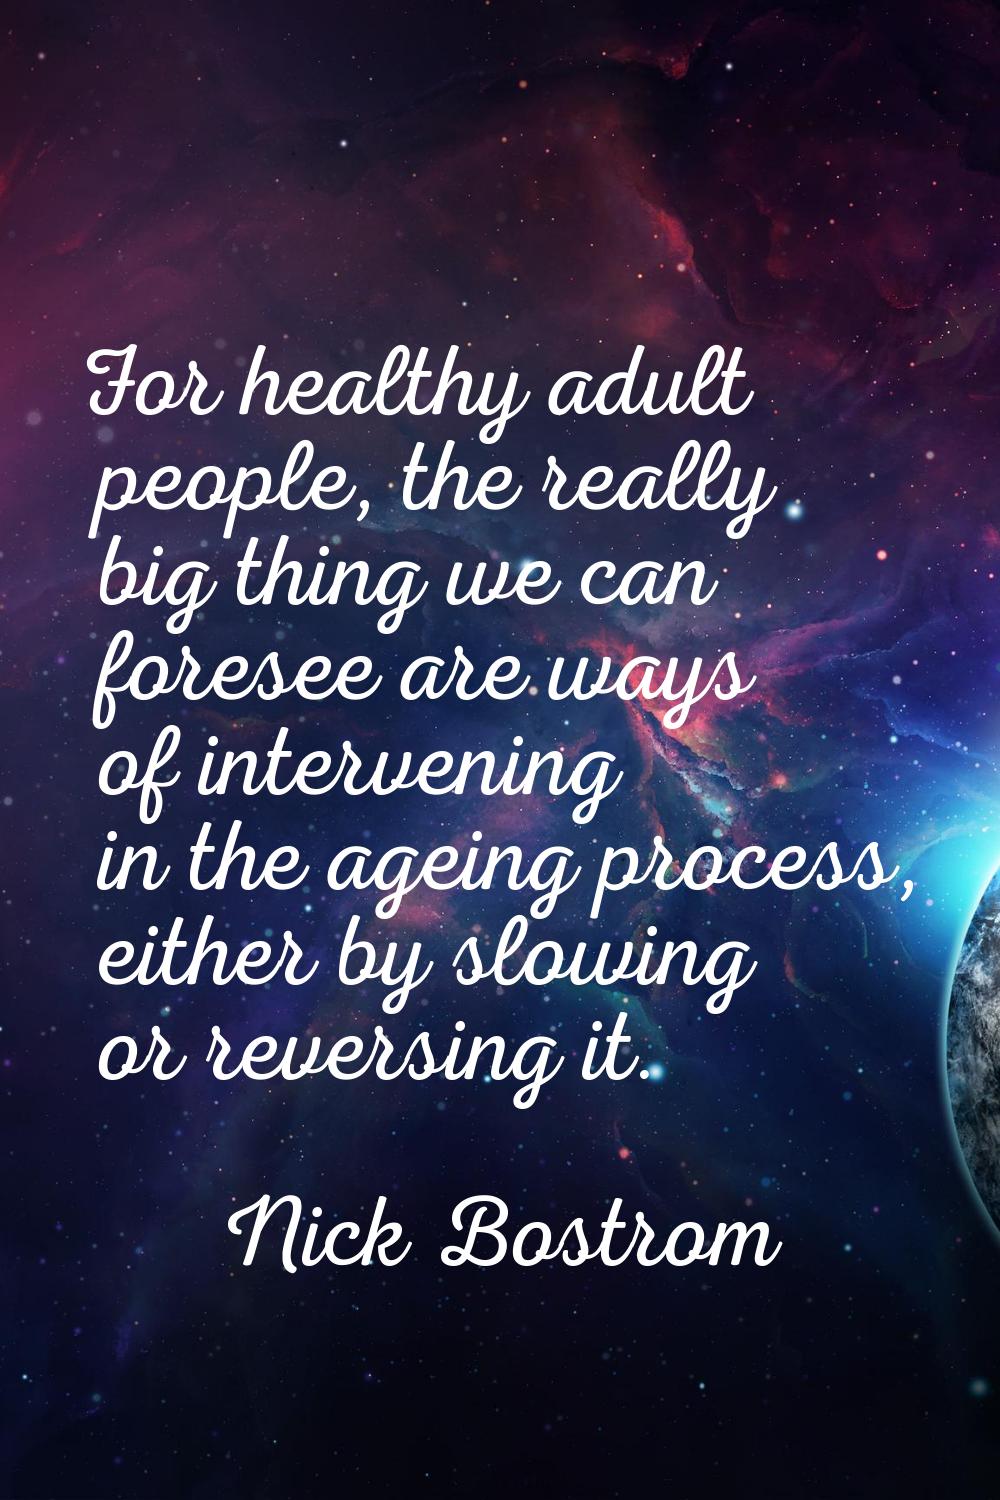 For healthy adult people, the really big thing we can foresee are ways of intervening in the ageing